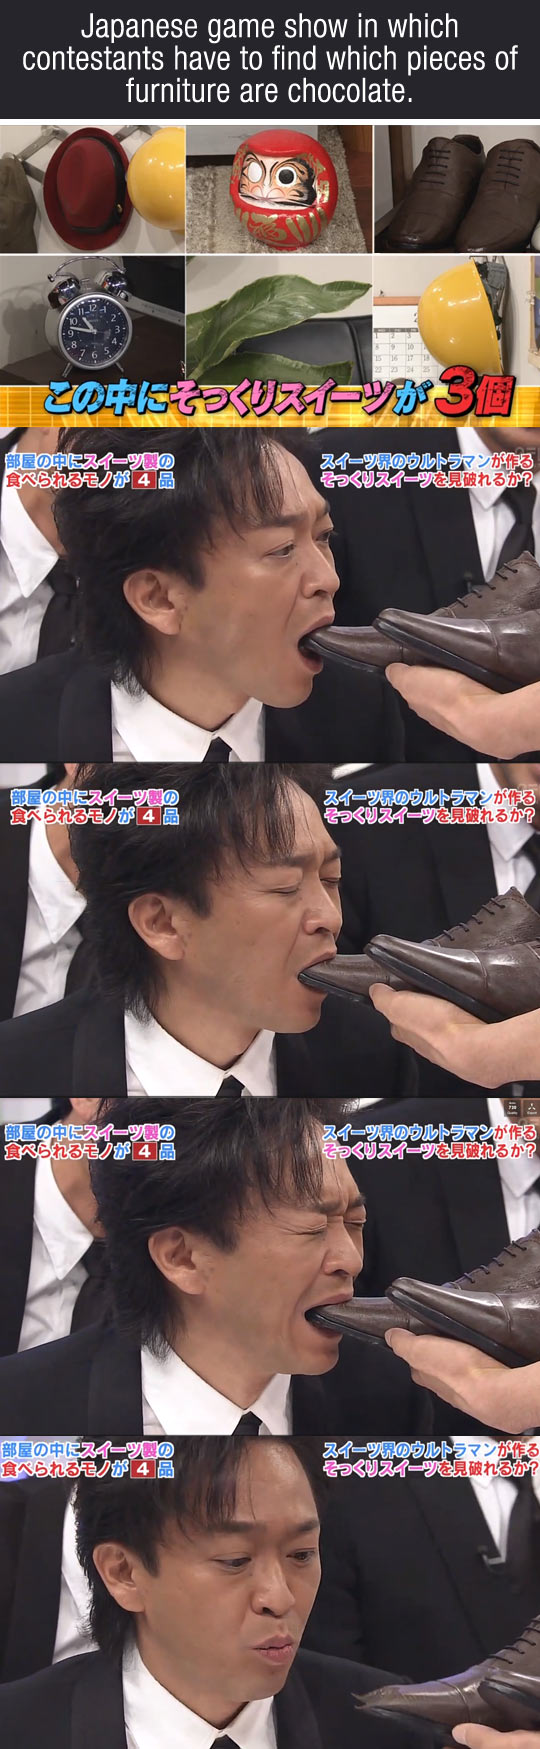 Japanese game shows...